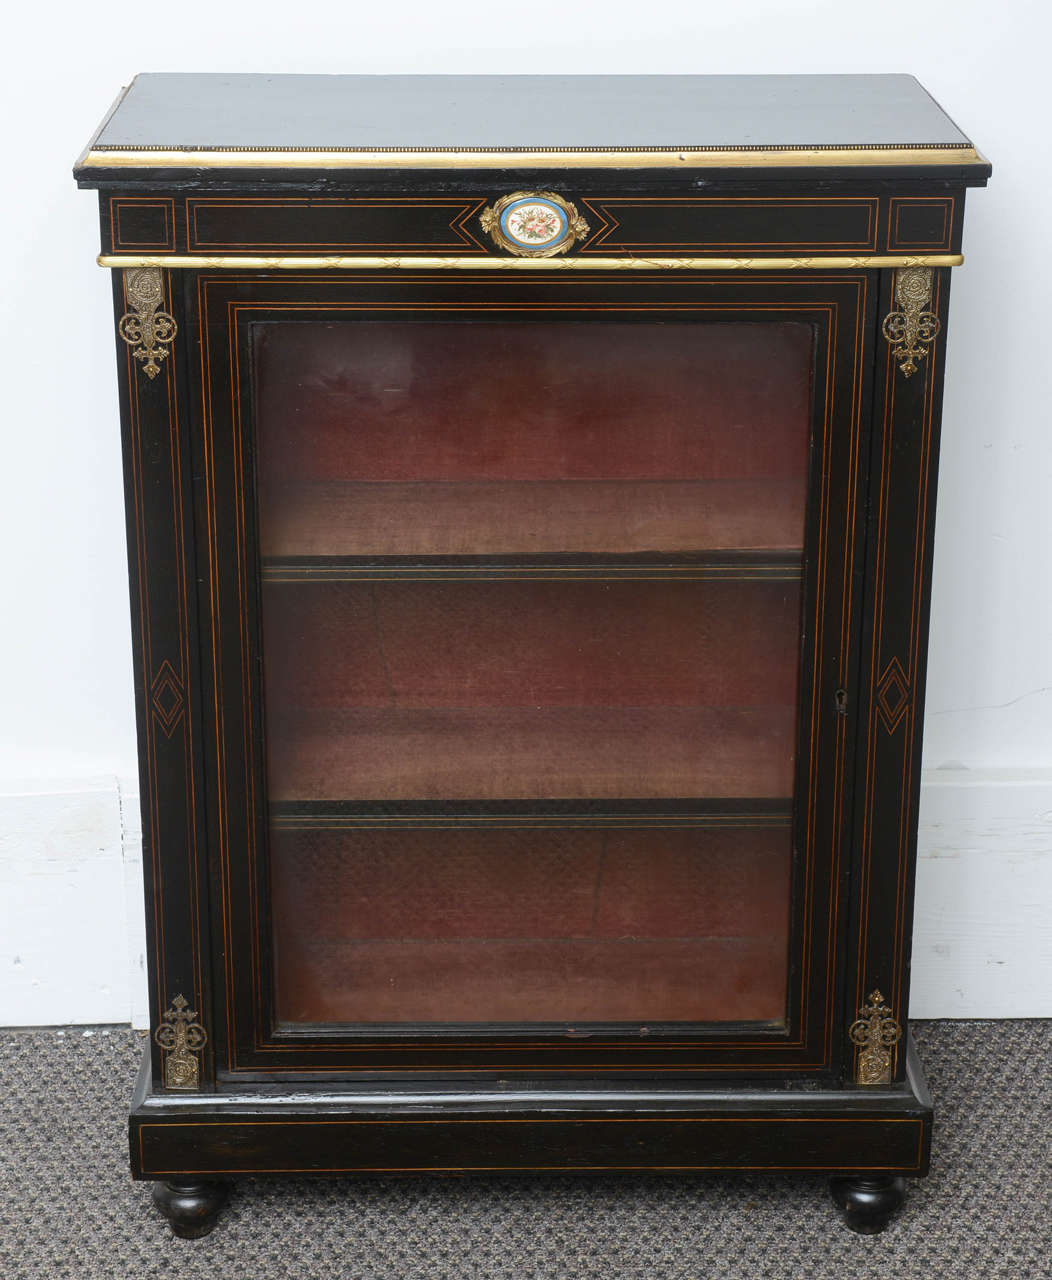 These are a very nice also rare to get a pair of black ebony cabinets with French Limoges plaques to the center top.
To the top they has brass bands round the edges and sides, to the front they also so brass crests to the top and bottom of the